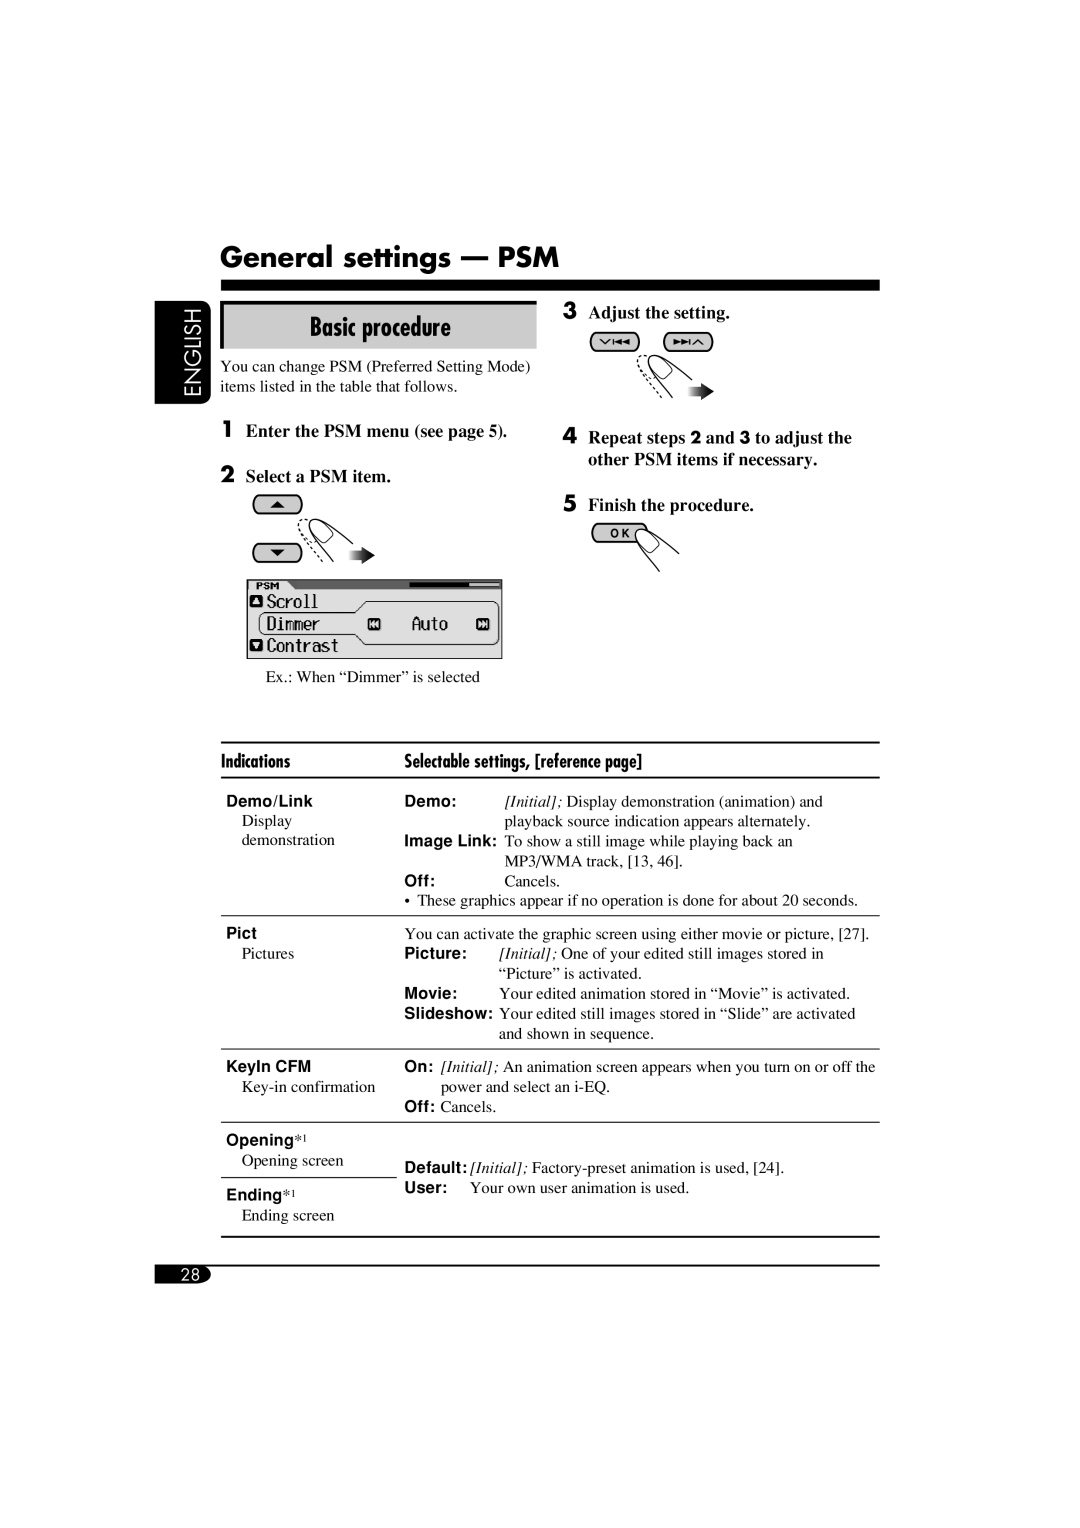 JVC KD-AR860, KD-LH810 General settings — PSM, Basic procedure, English, Adjust the setting, Enter the PSM menu see page 